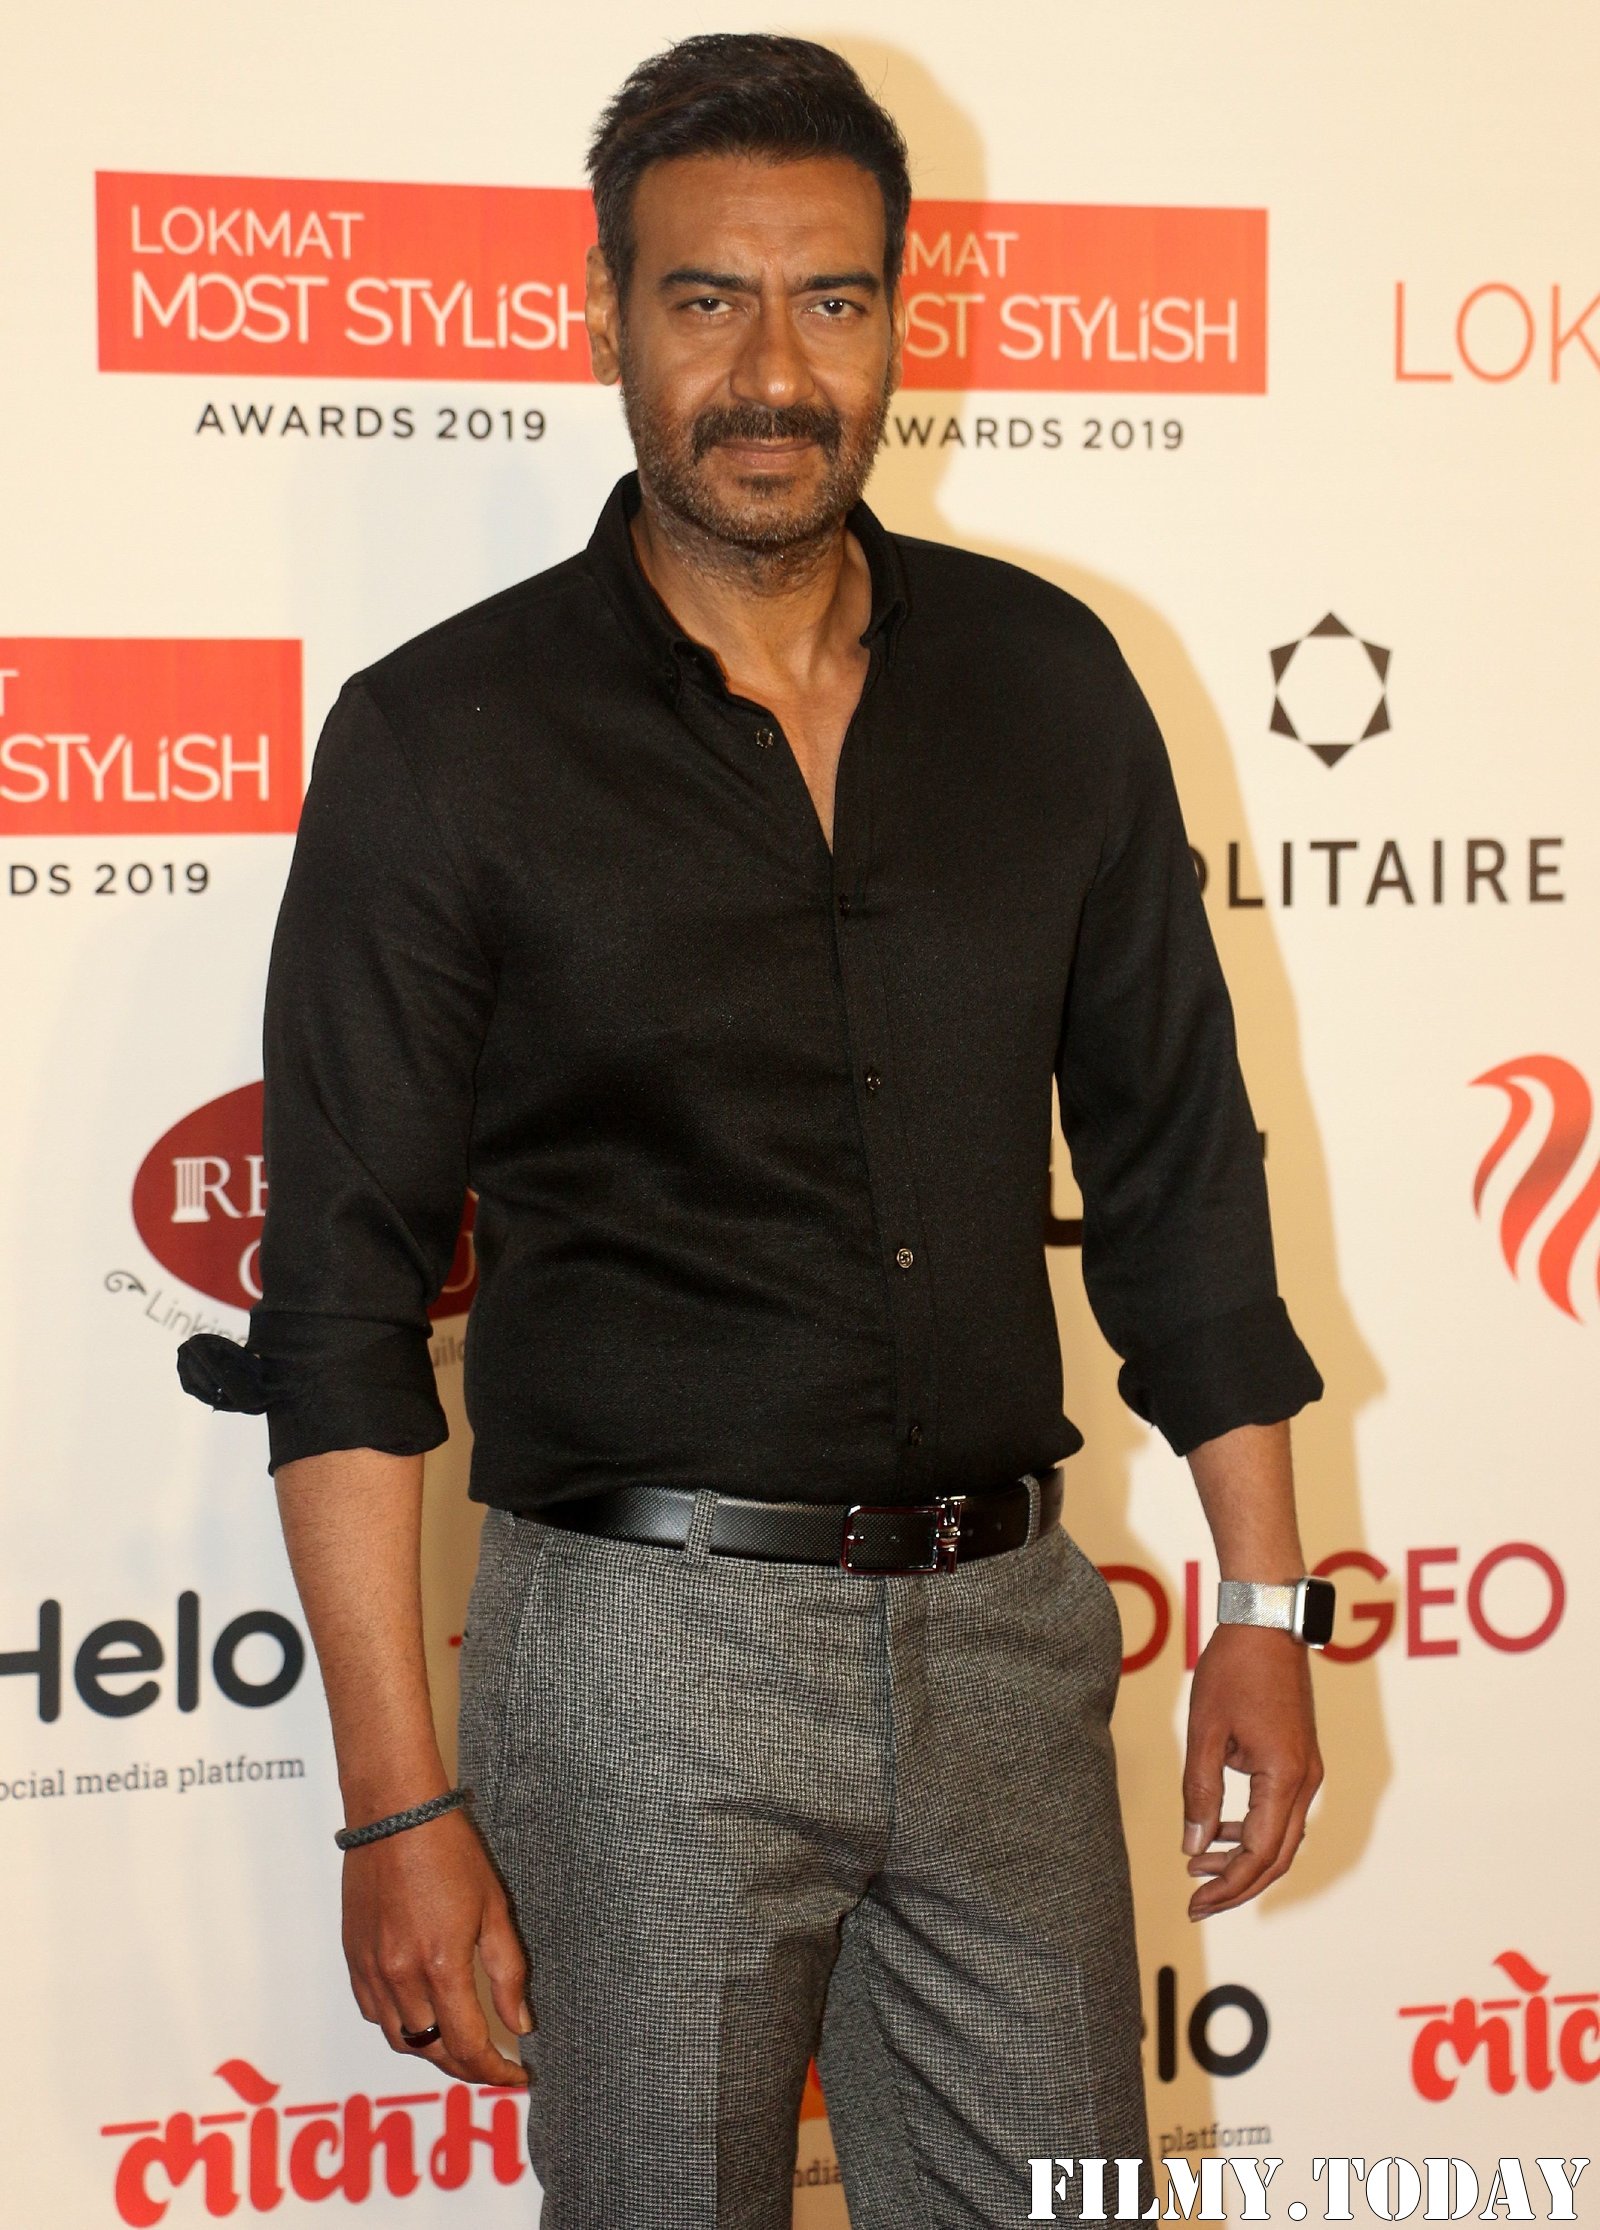 Ajay Devgn - Photos: Lokmat Most Stylish Awards 2019 At The Leela Hotel | Picture 1709608